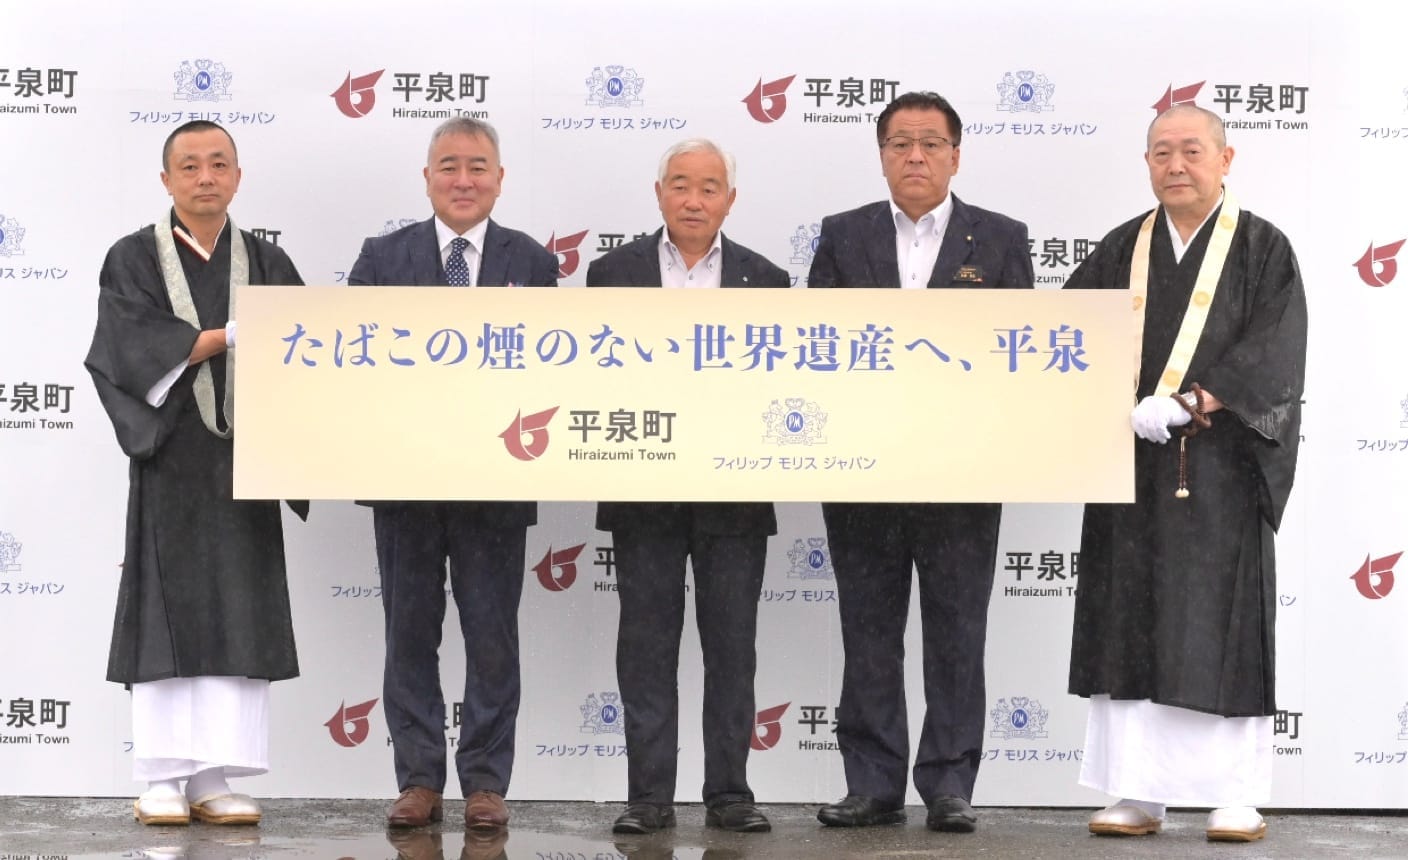 Five men holding up a sign showing that Hiraizumi, Japan, is a smoke-free town.